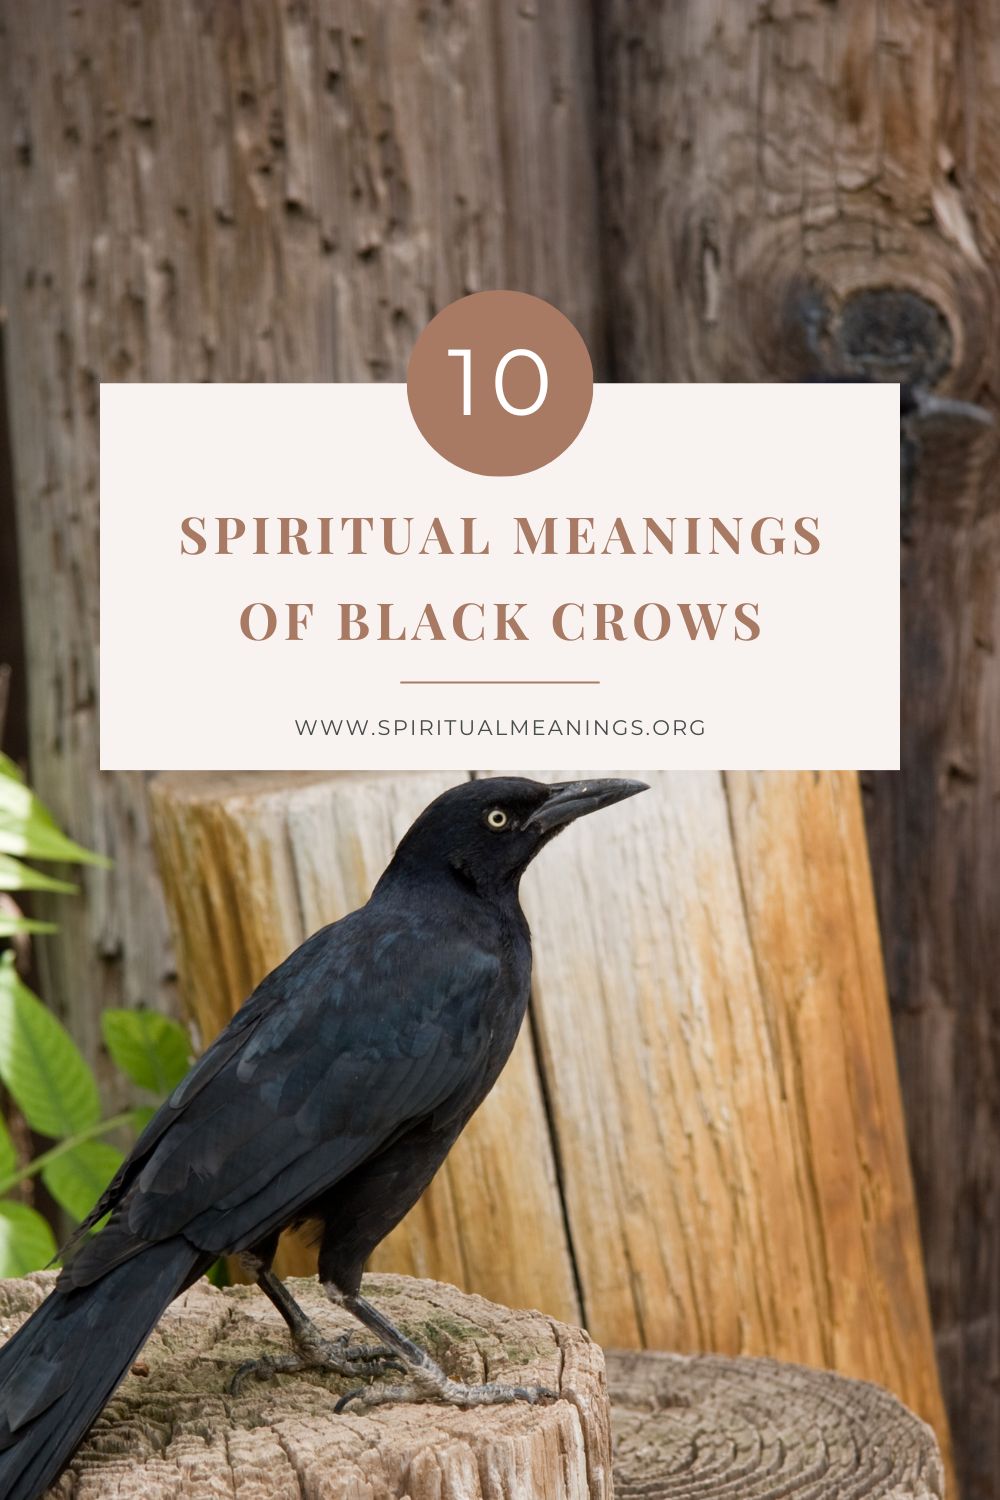 Crows as Messengers, Omens and Guides